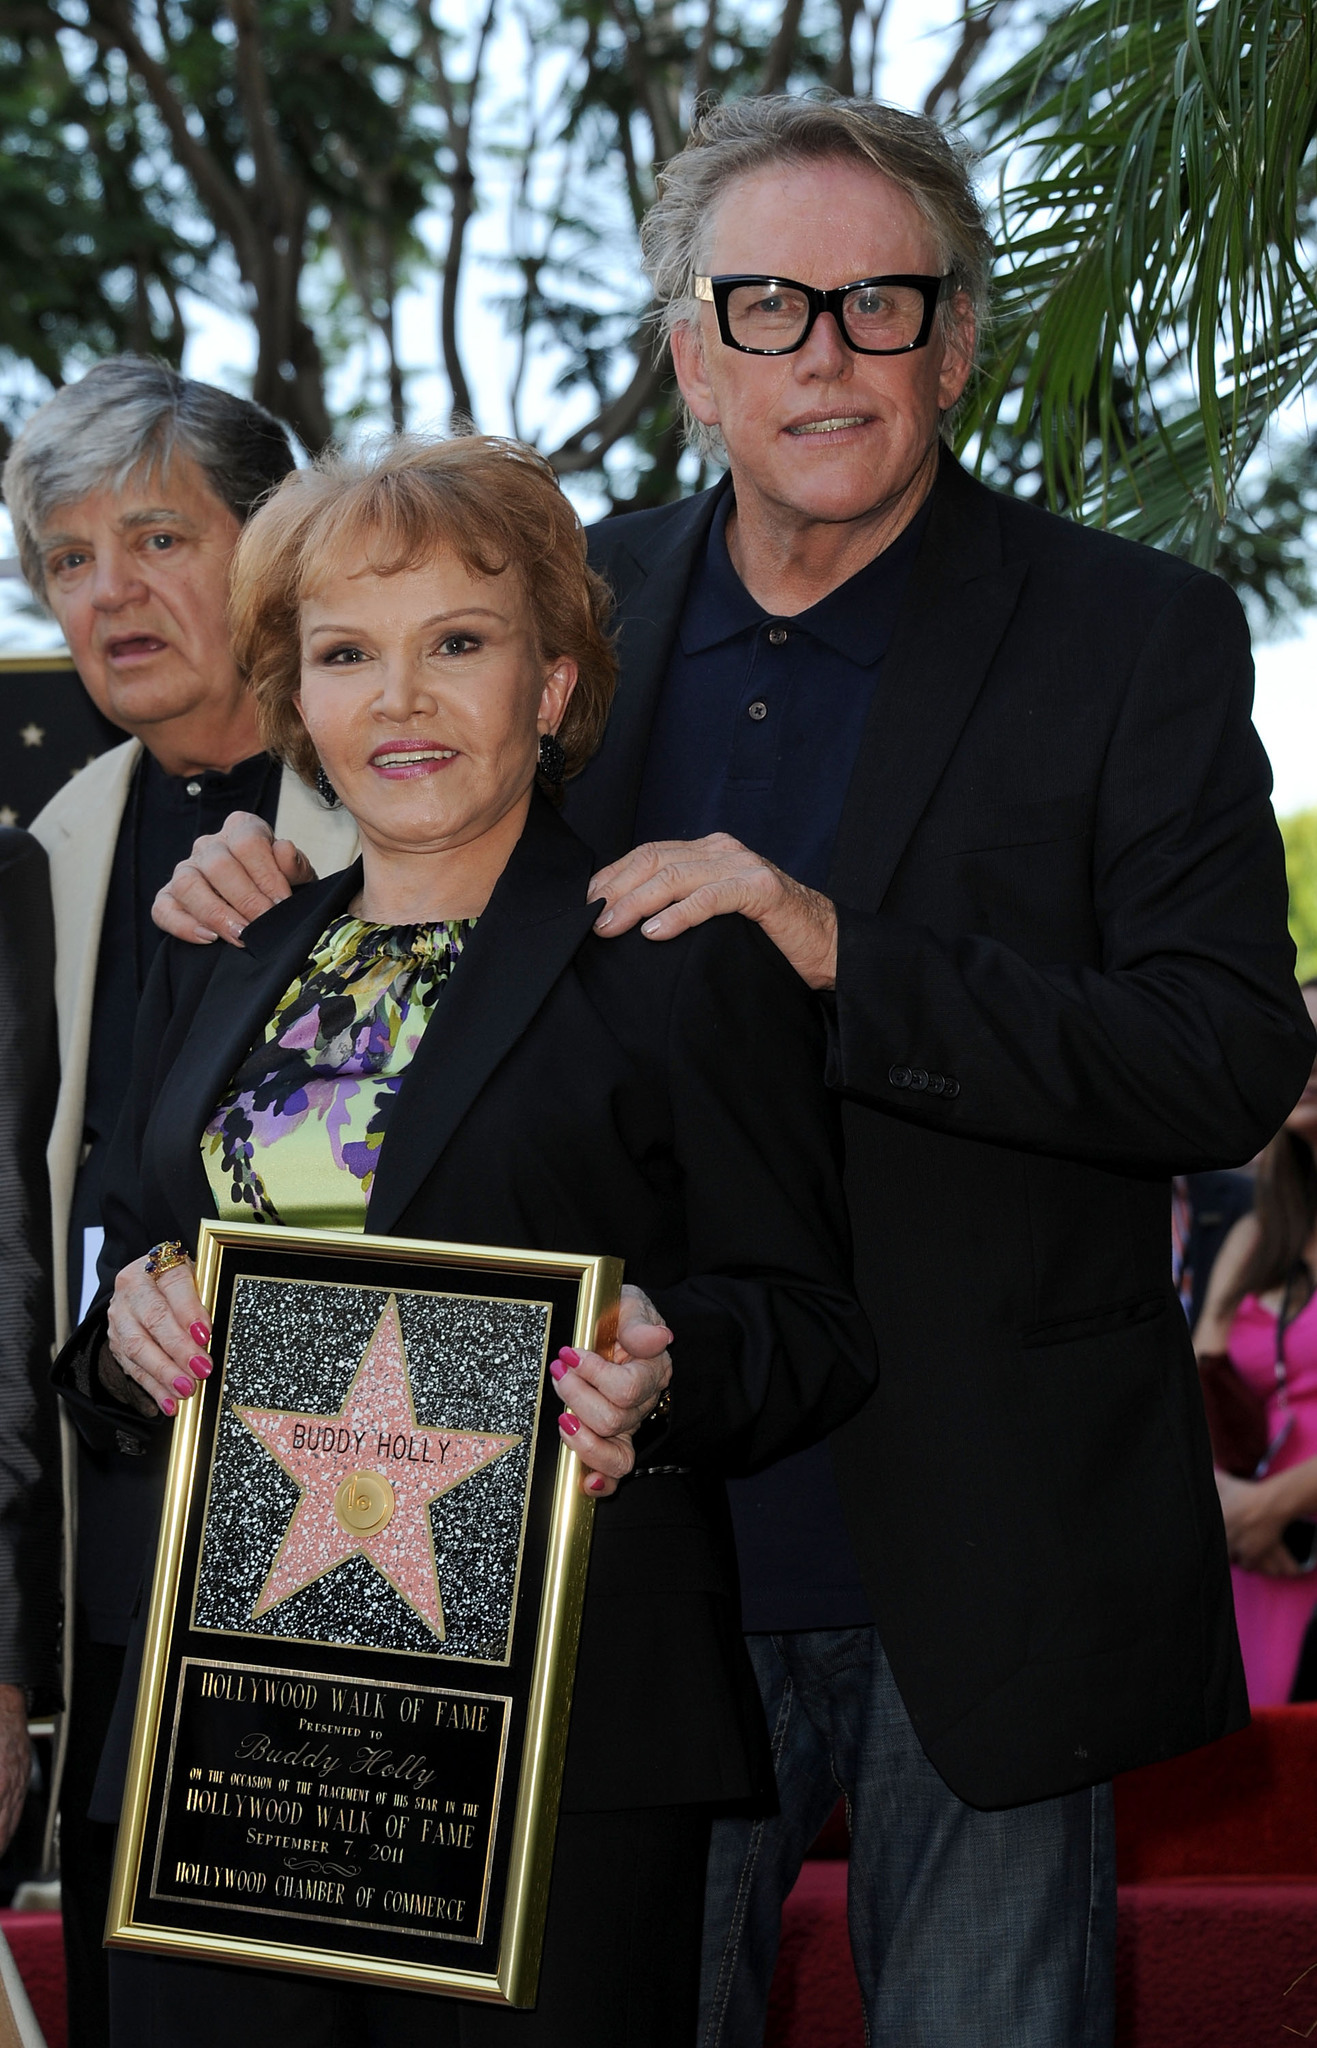 Gary Busey, Phil Everly and Holly Hollywood